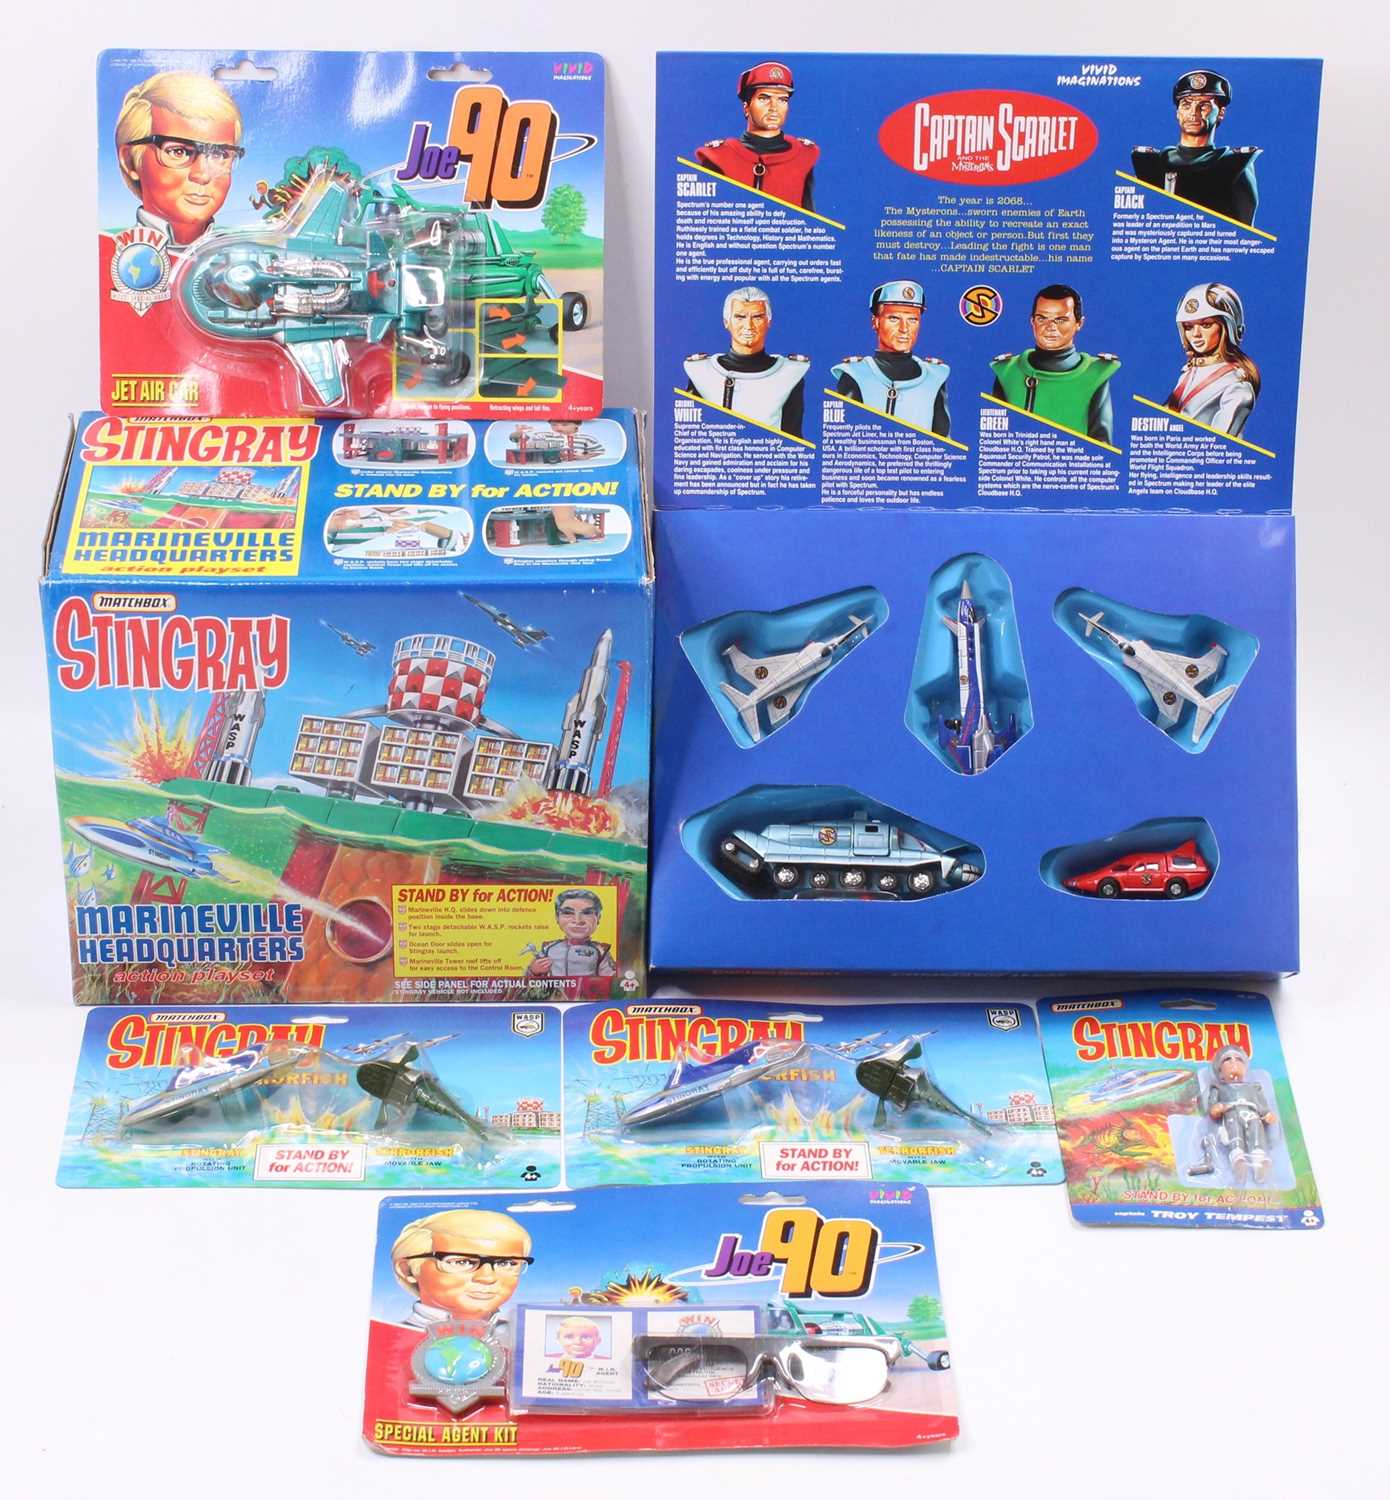 Matchbox and Vivid Imaginations Gerry Anderson modern issued model group to include Stingray